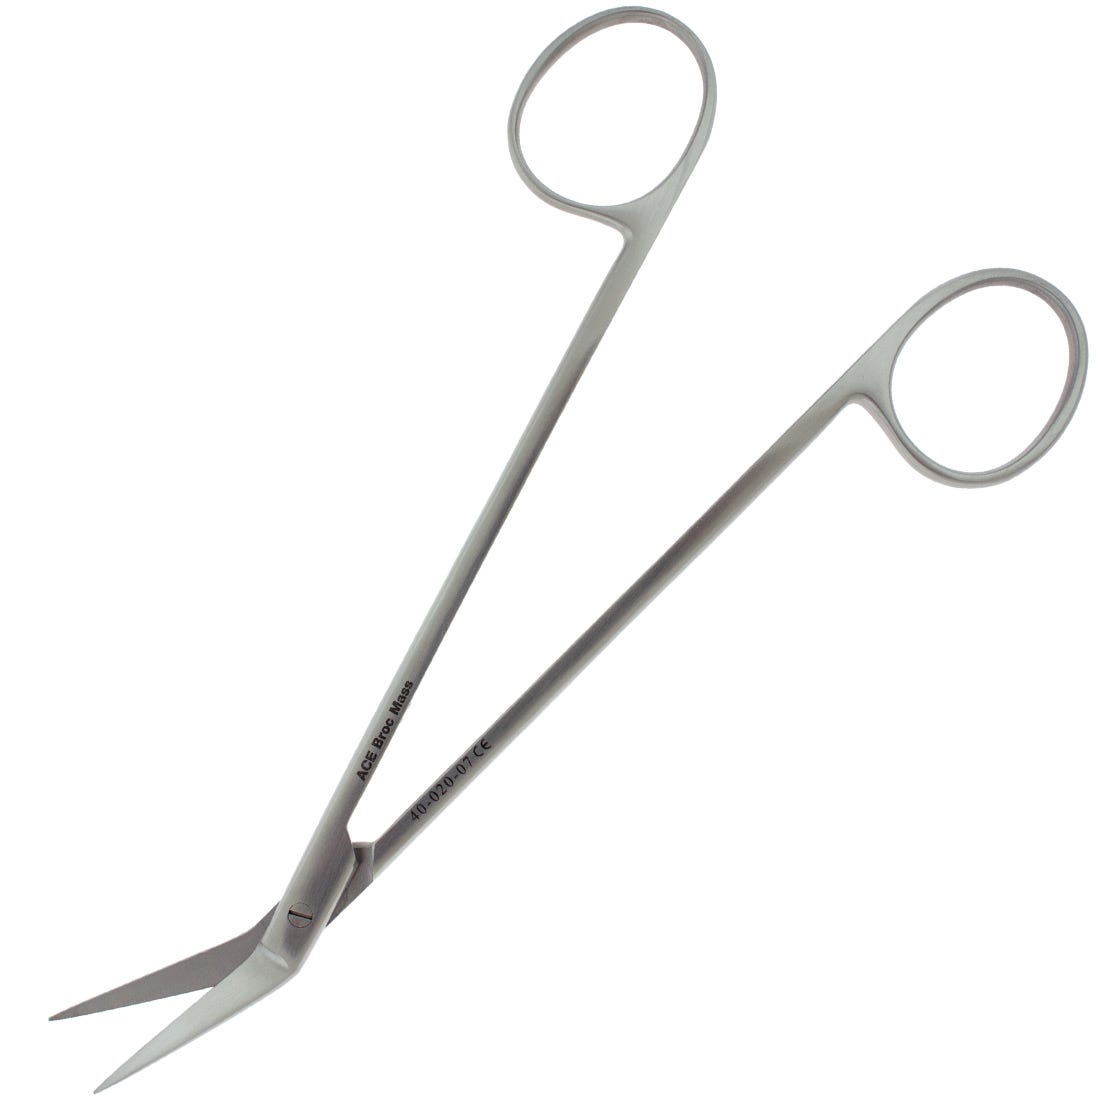 ACE Kelly Scissors, angled, smooth